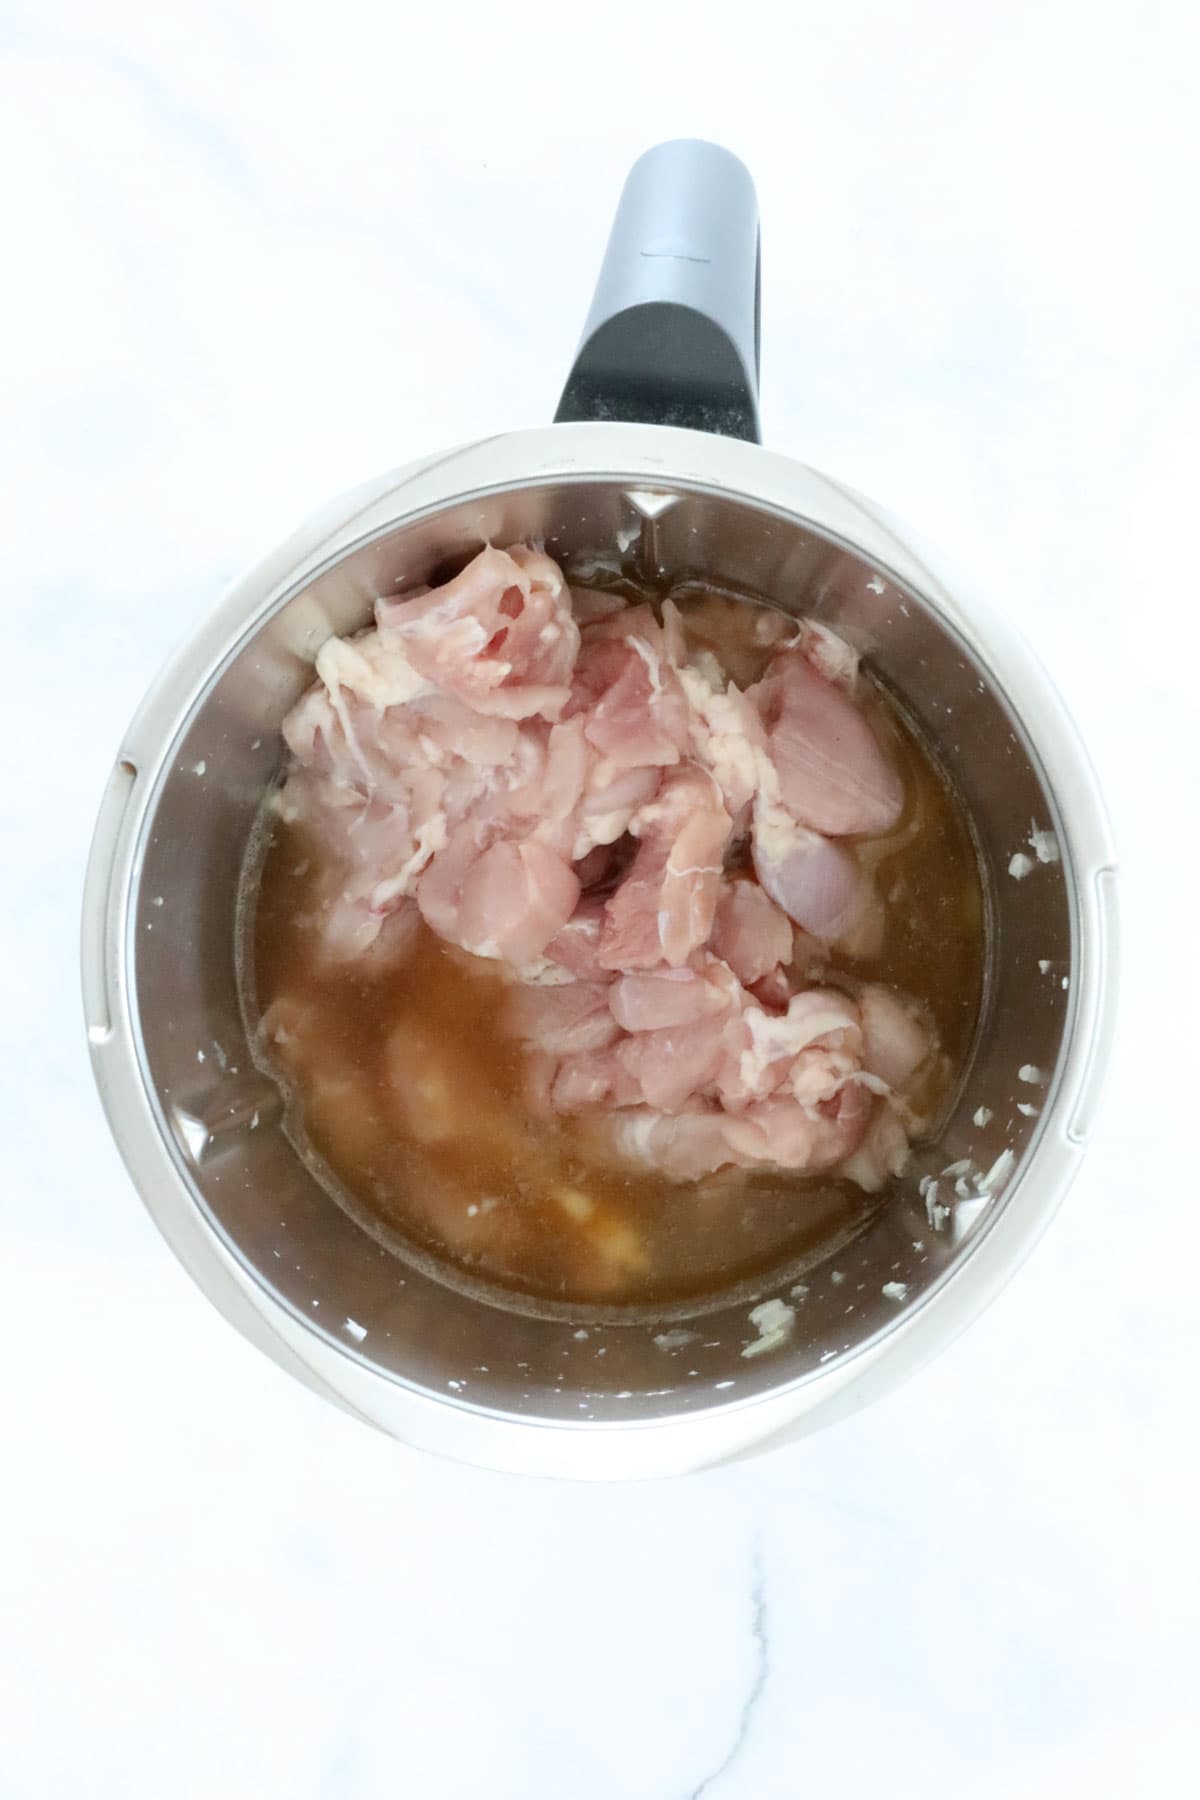 Chopped chicken in a Thermomix.